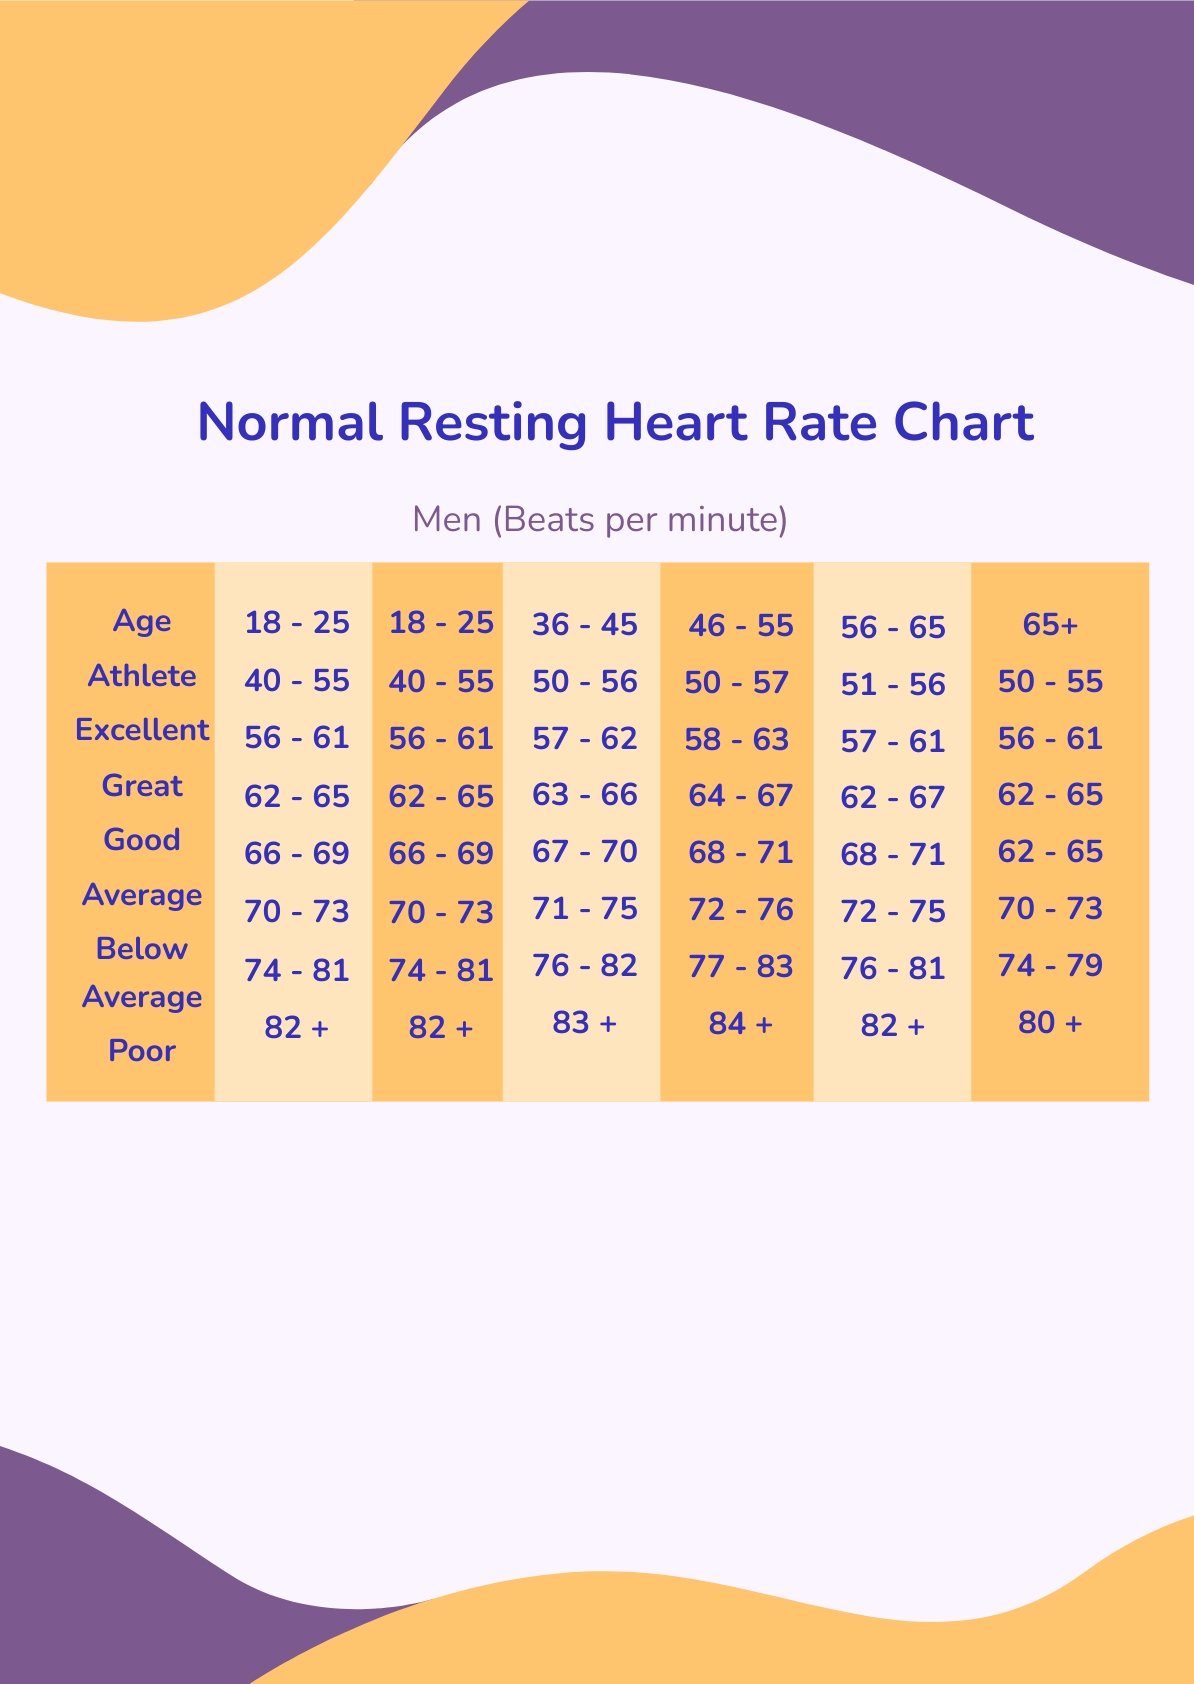 Free Normal Resting Heart Rate Chart Qkhy3 